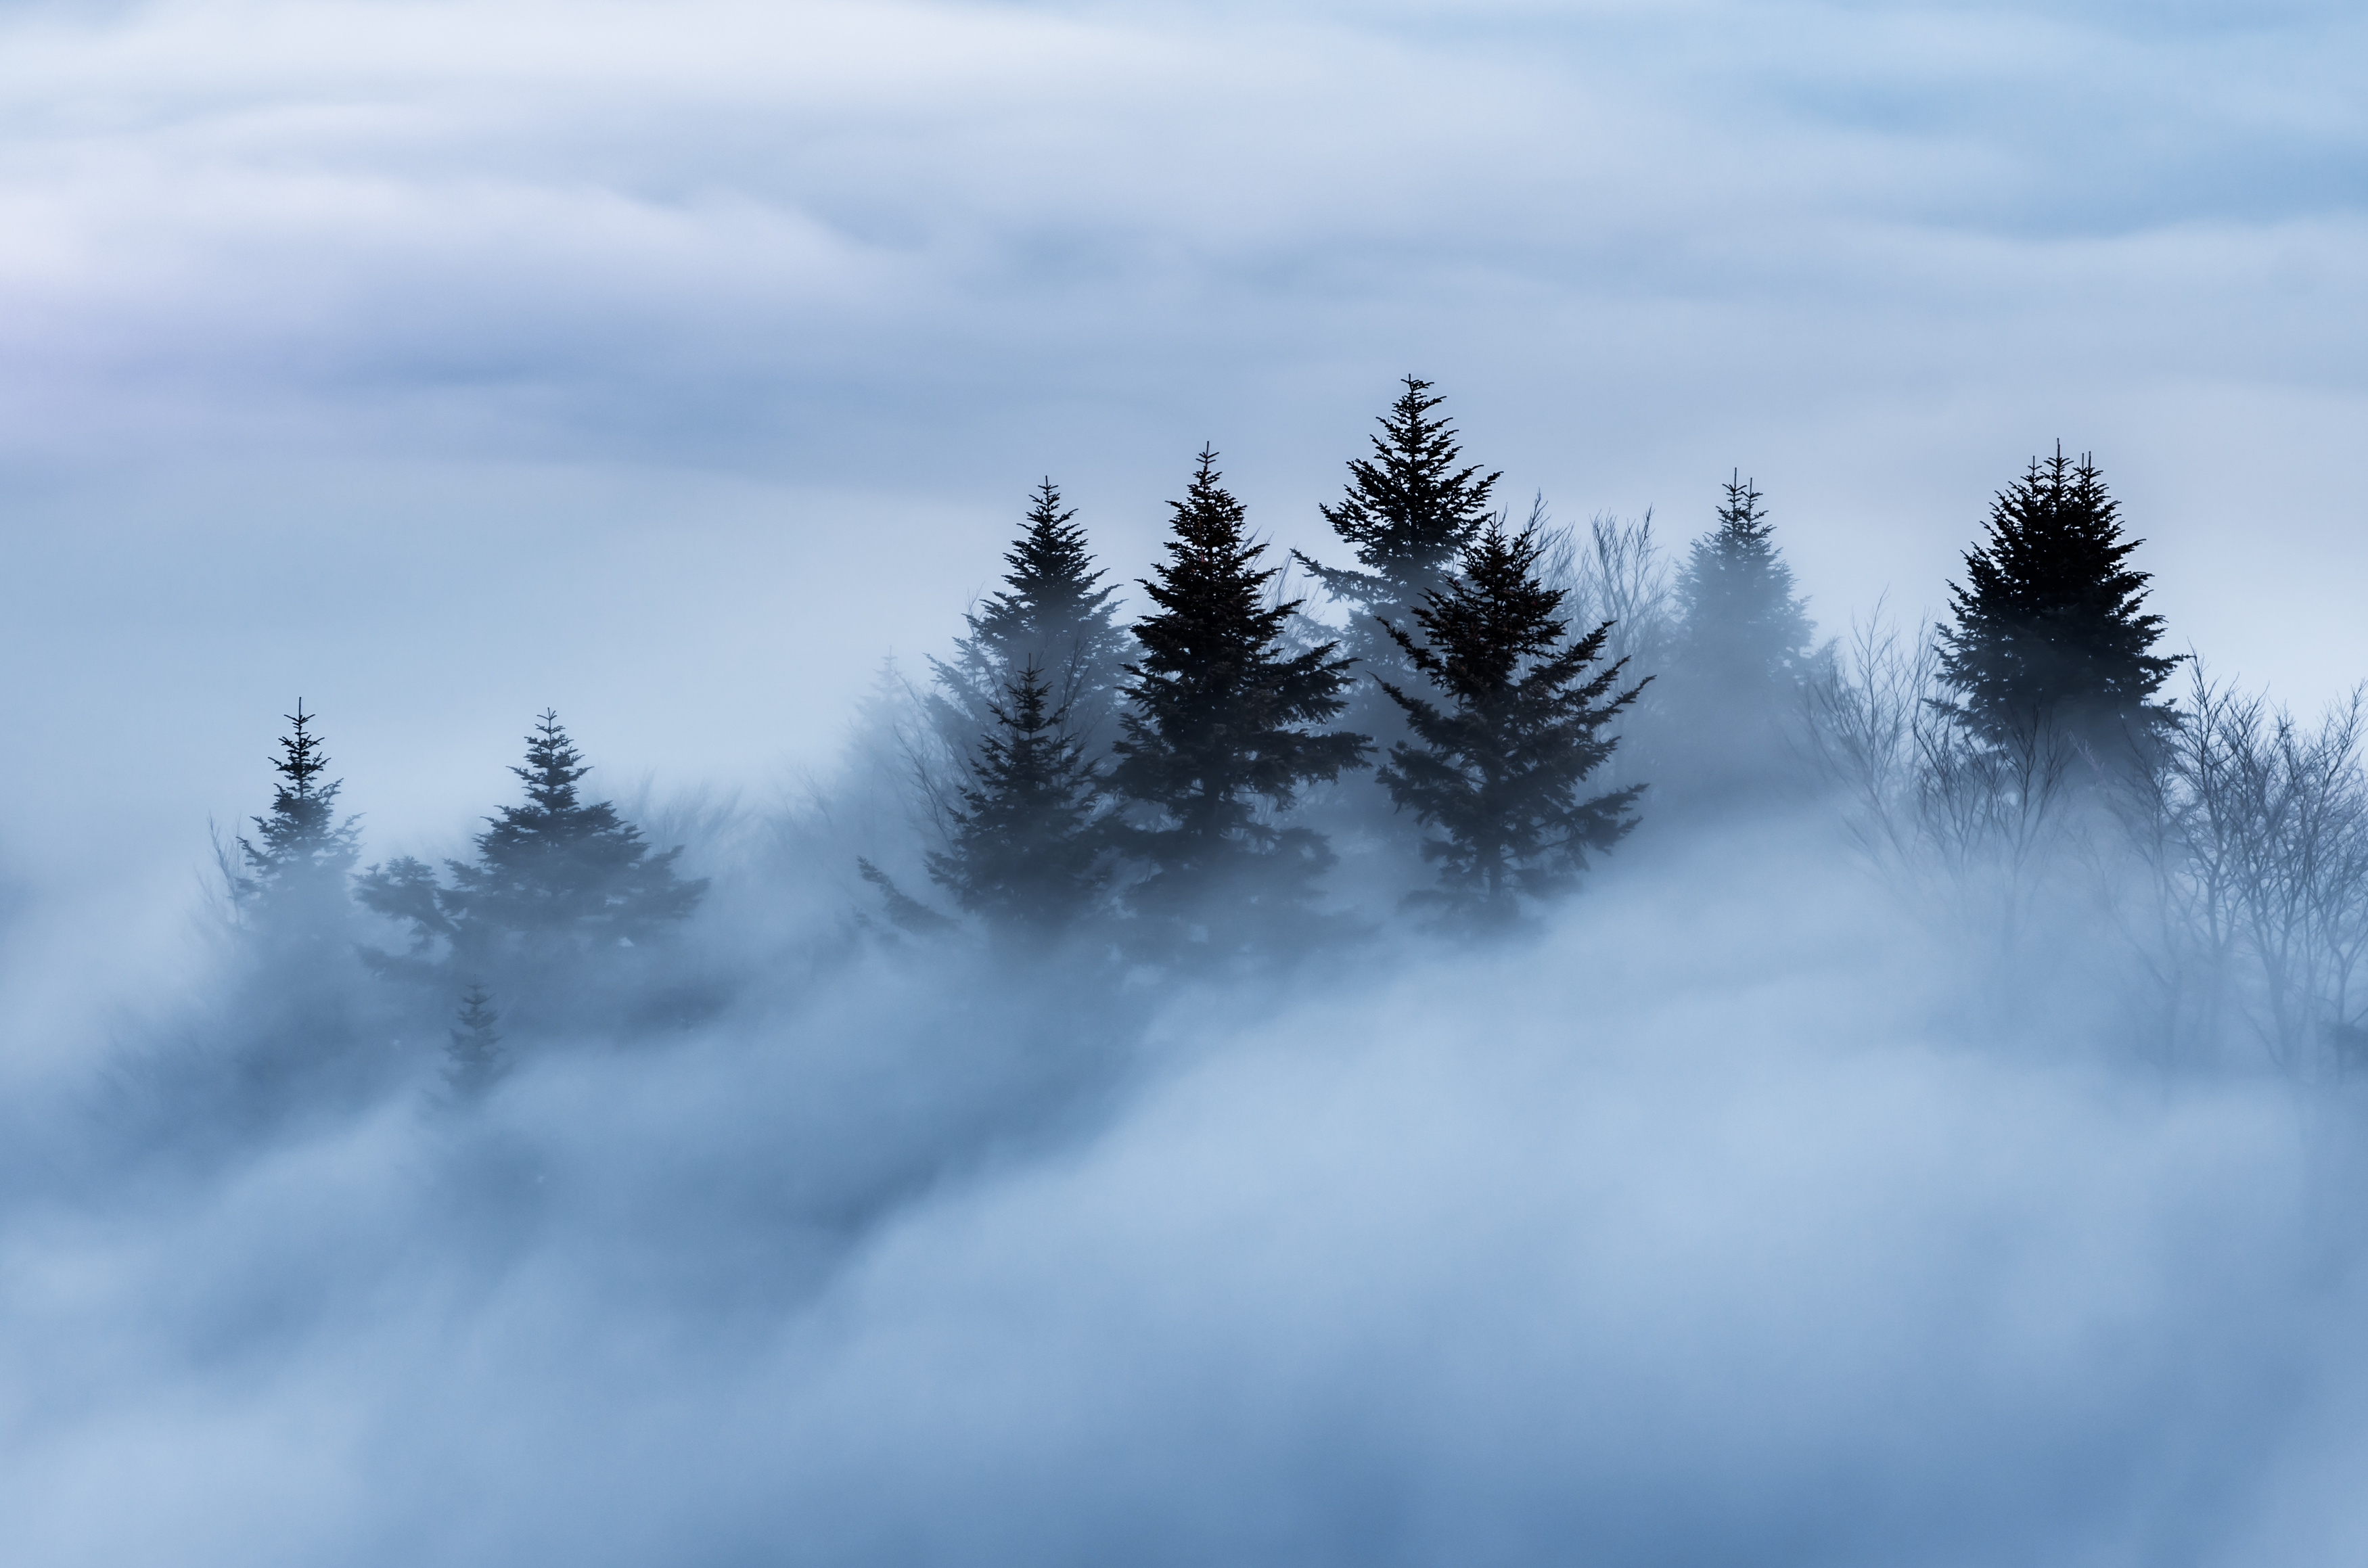 How To Photograph Fog: Equipment, Settings and Composition